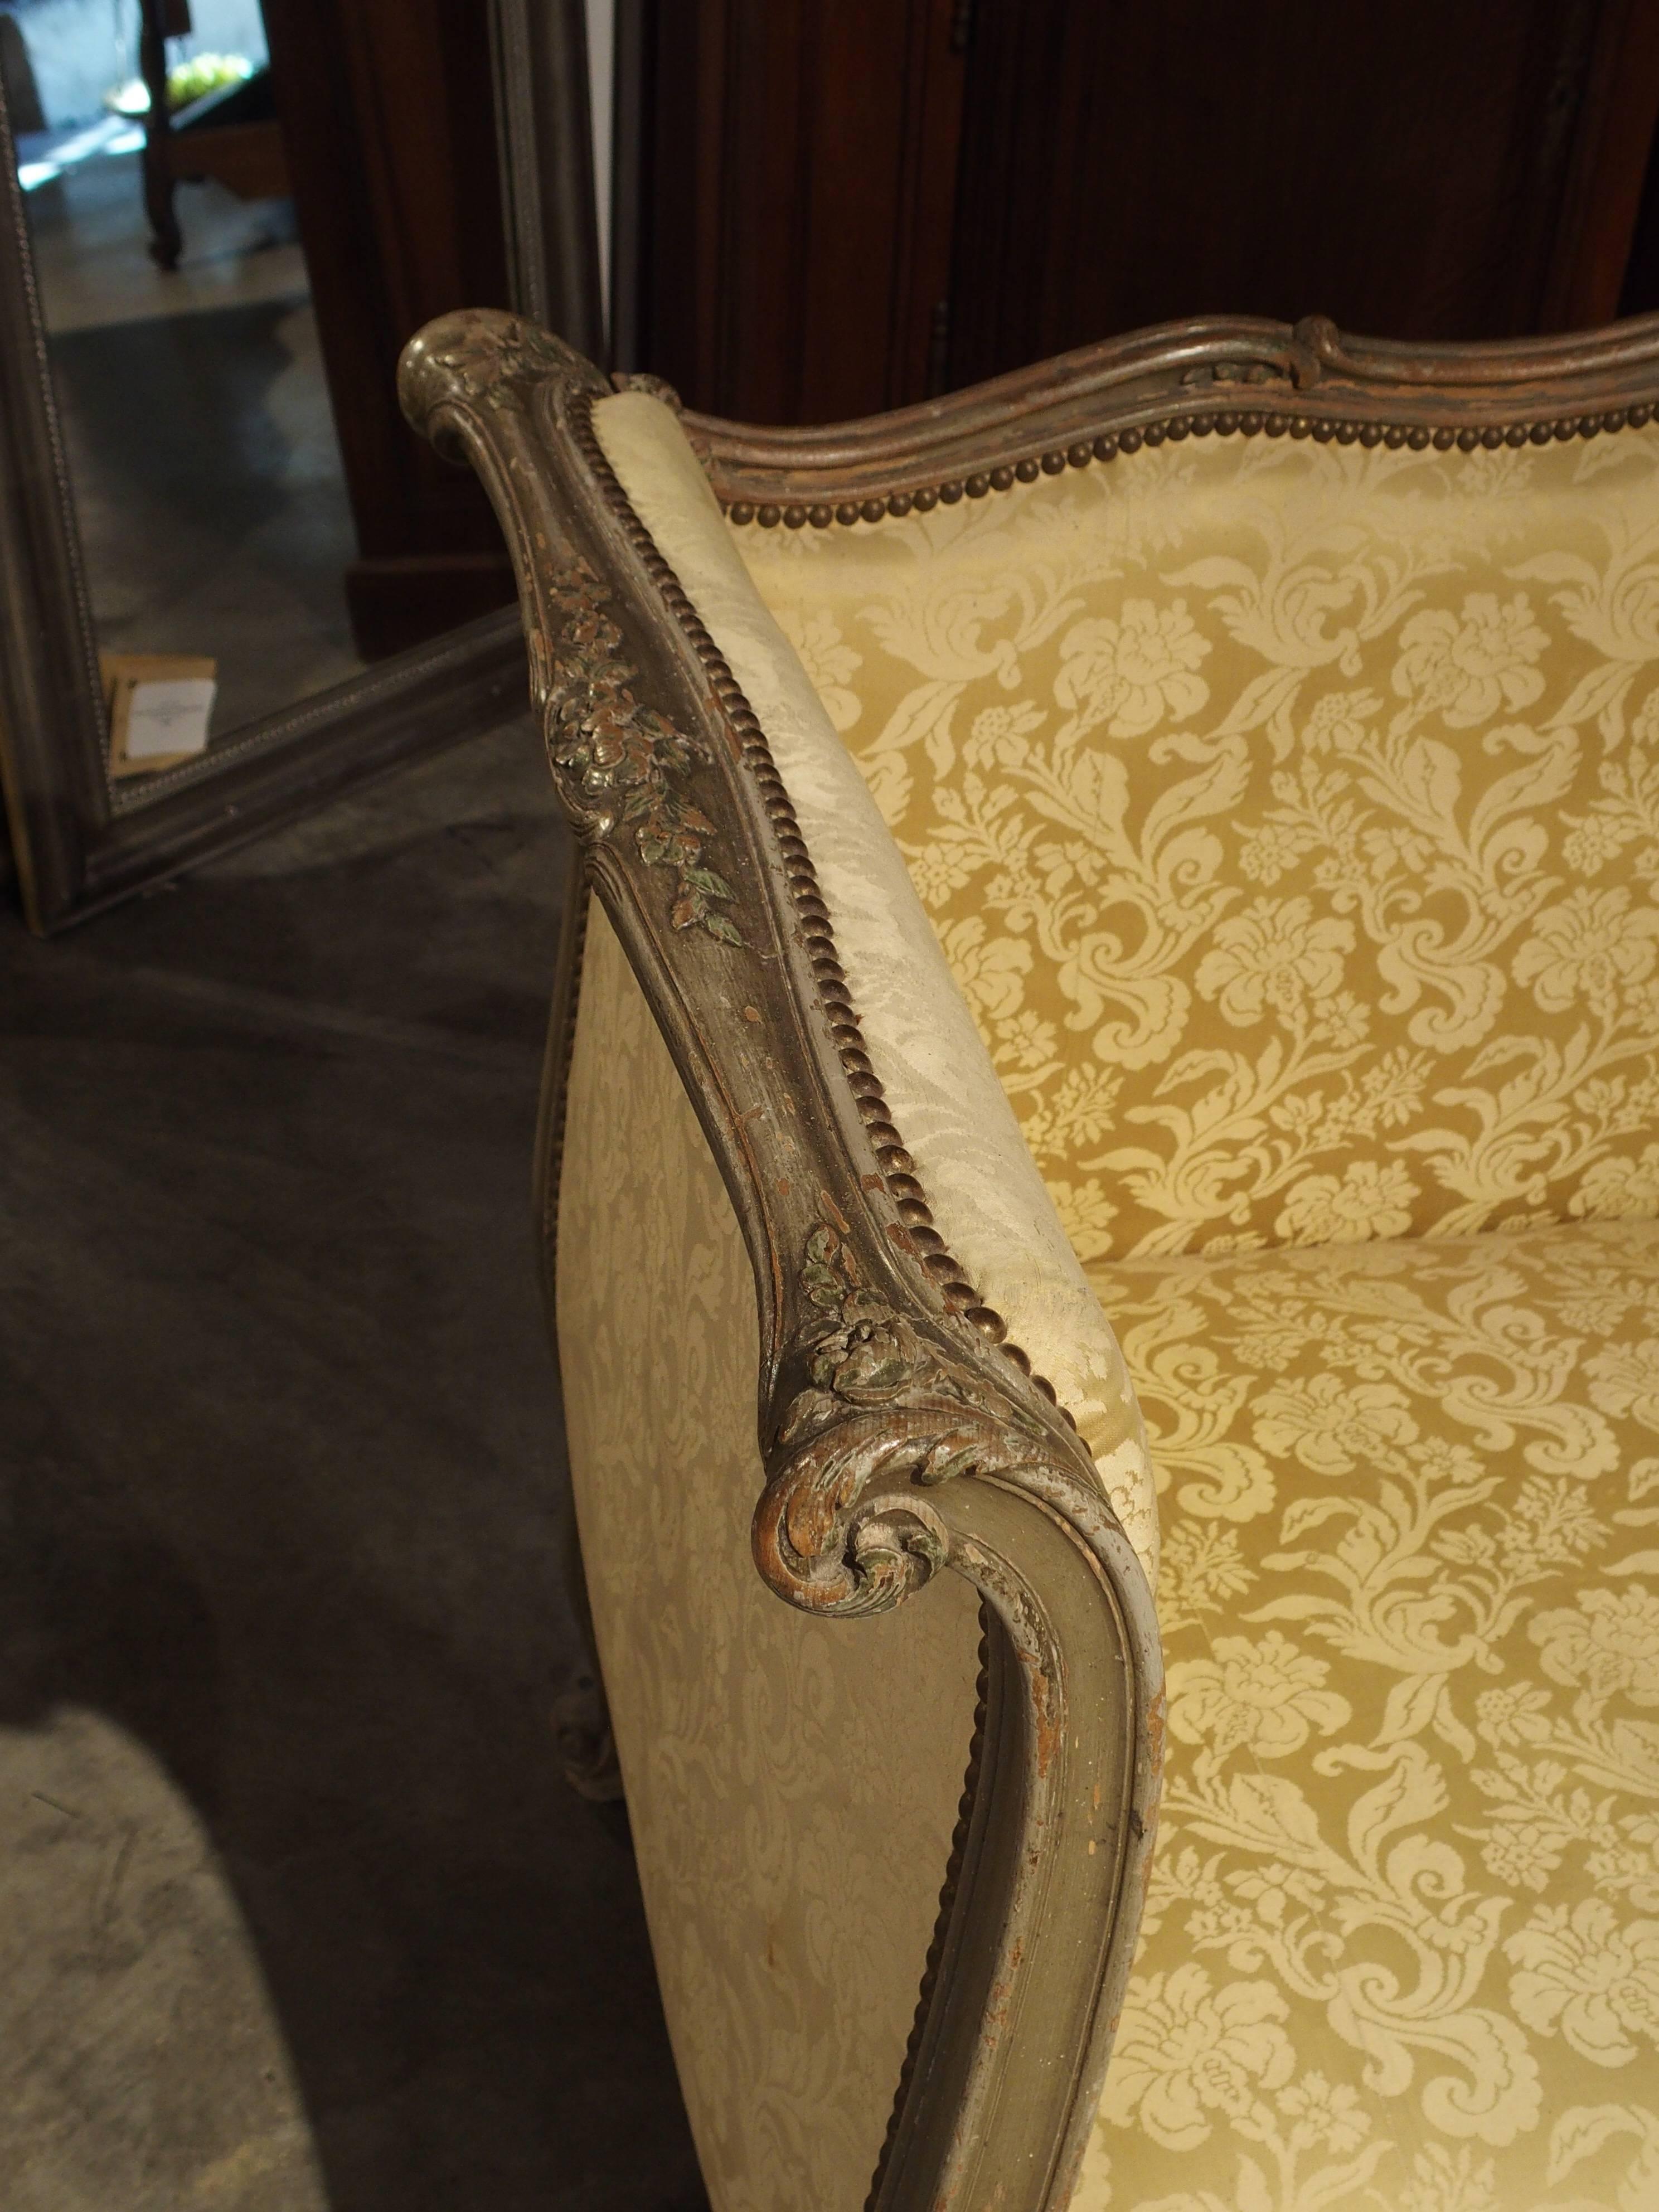 This antique, parcel-paint Louis XV style canapé or settee has a graceful, central domed, shaped back. The scrolled side arms are full height allowing the person to rest their back with full support, if choosing to lounge on the settee. There are